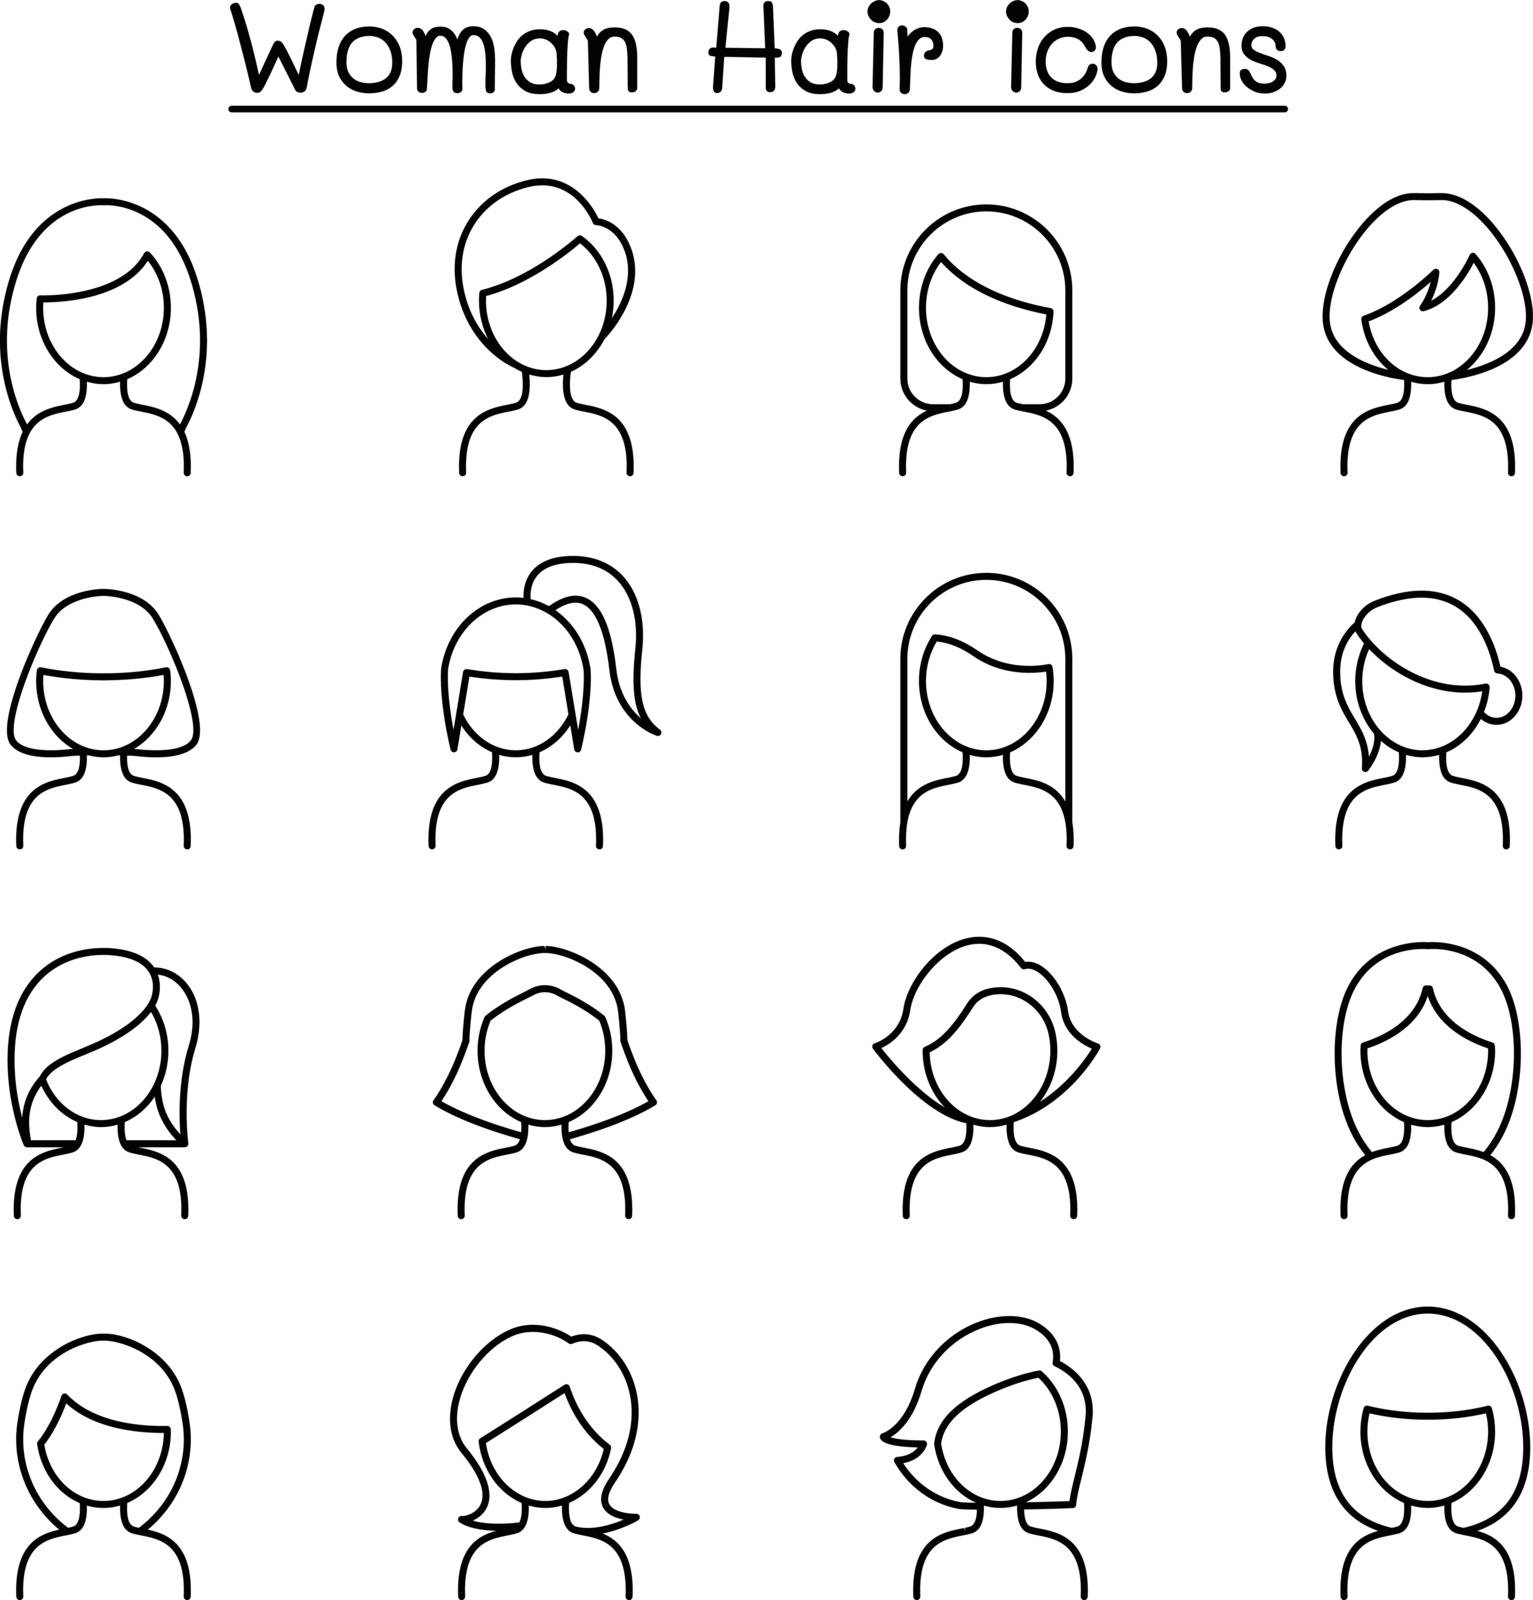 Woman Hair Style icon set in thin line style by Puckung